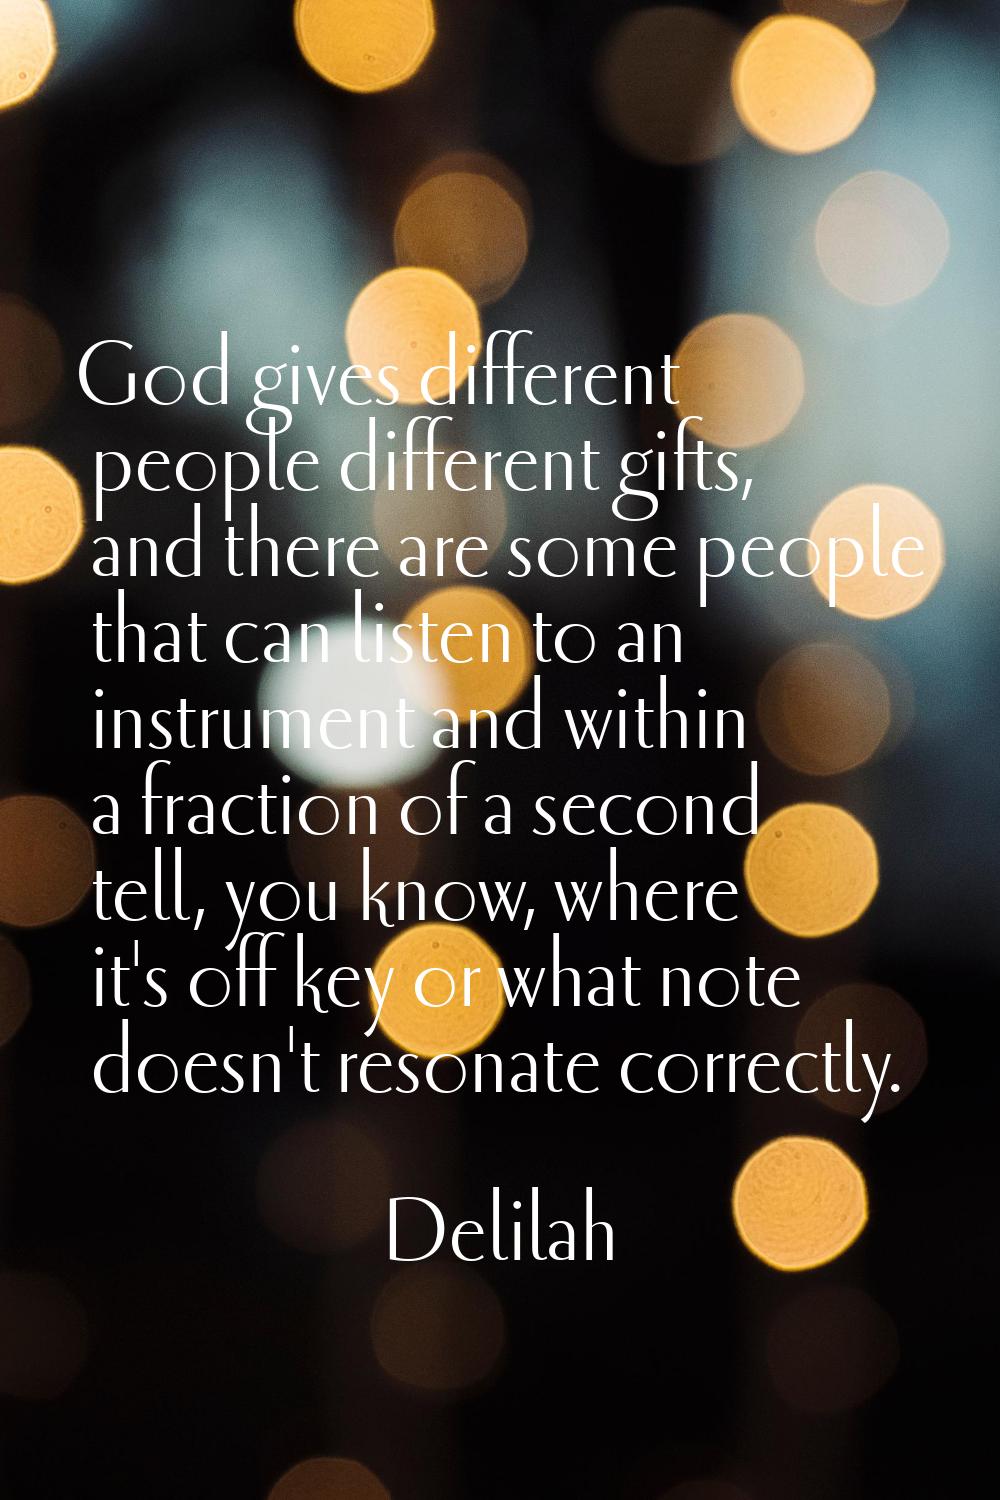 God gives different people different gifts, and there are some people that can listen to an instrum